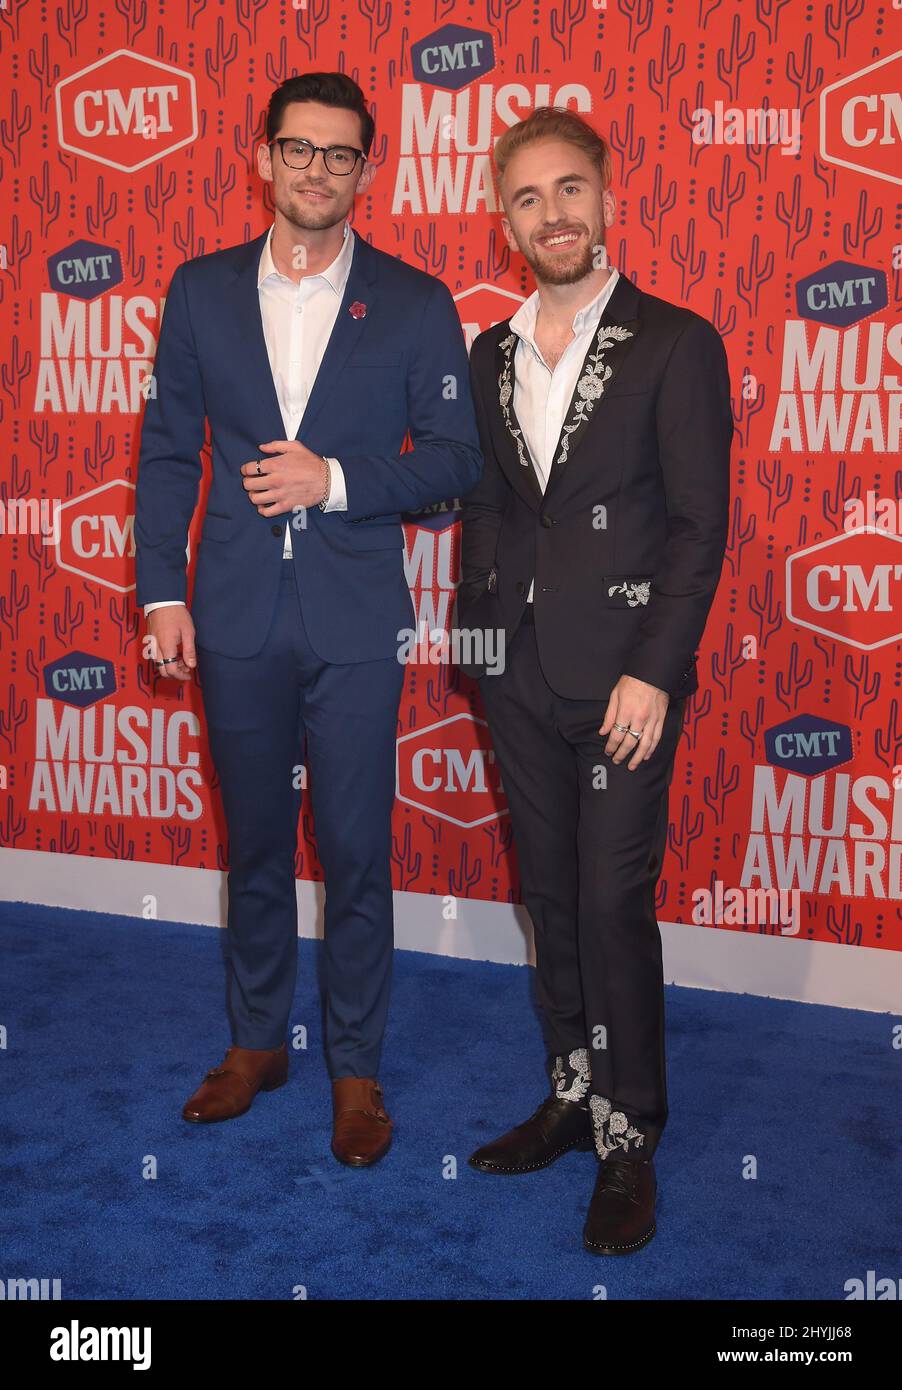 Seaforth at the 2019 CMT Music Awards held at the Bridgestone Arena on June 5, 2019 in Nashville, TN. Stock Photo